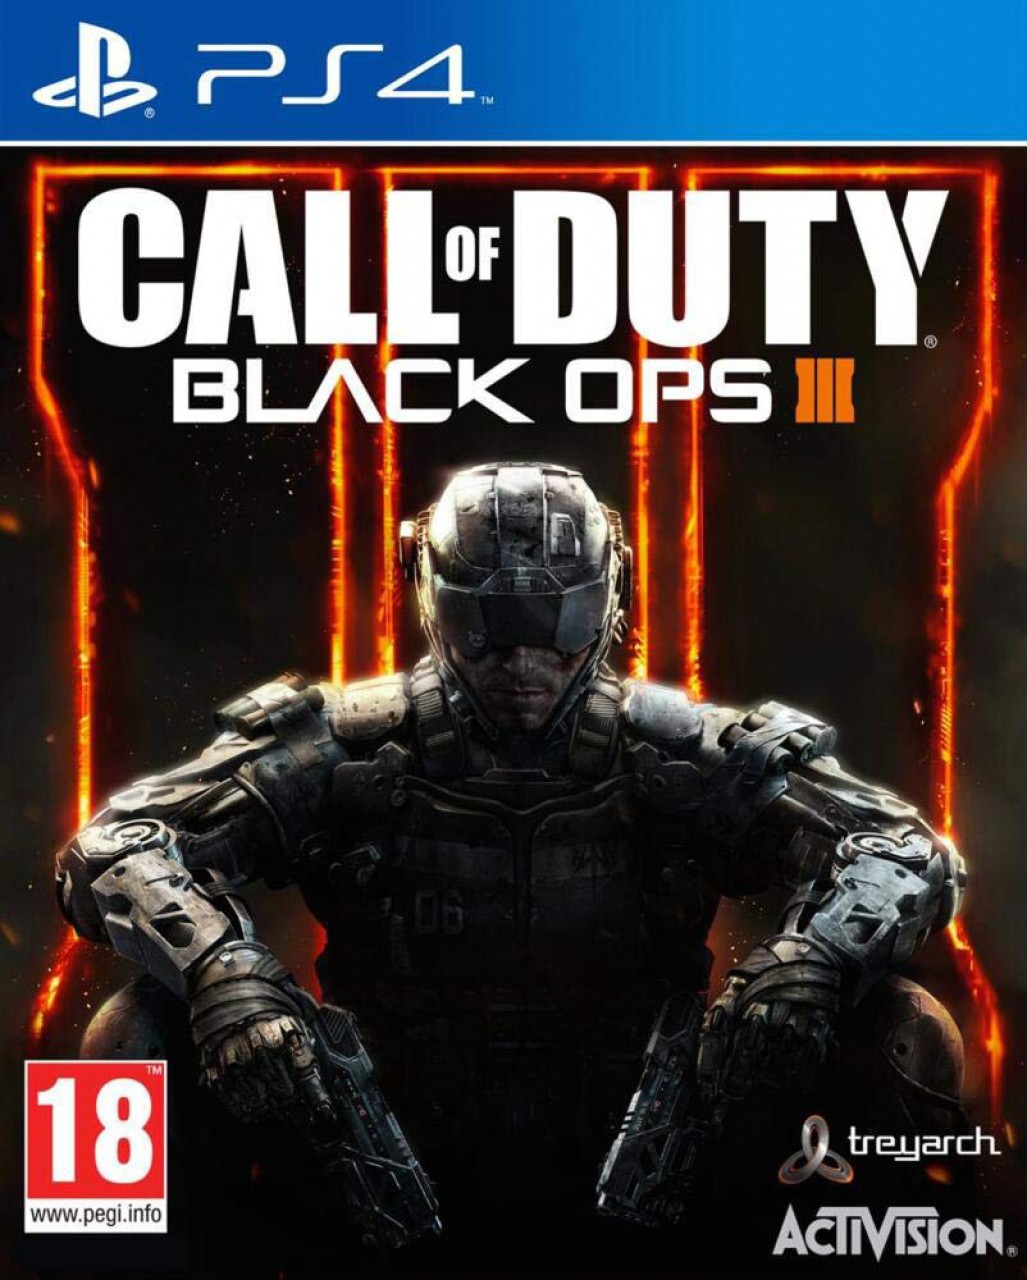 Call of duty black ops 3, Video Games - Consolas, Bissau